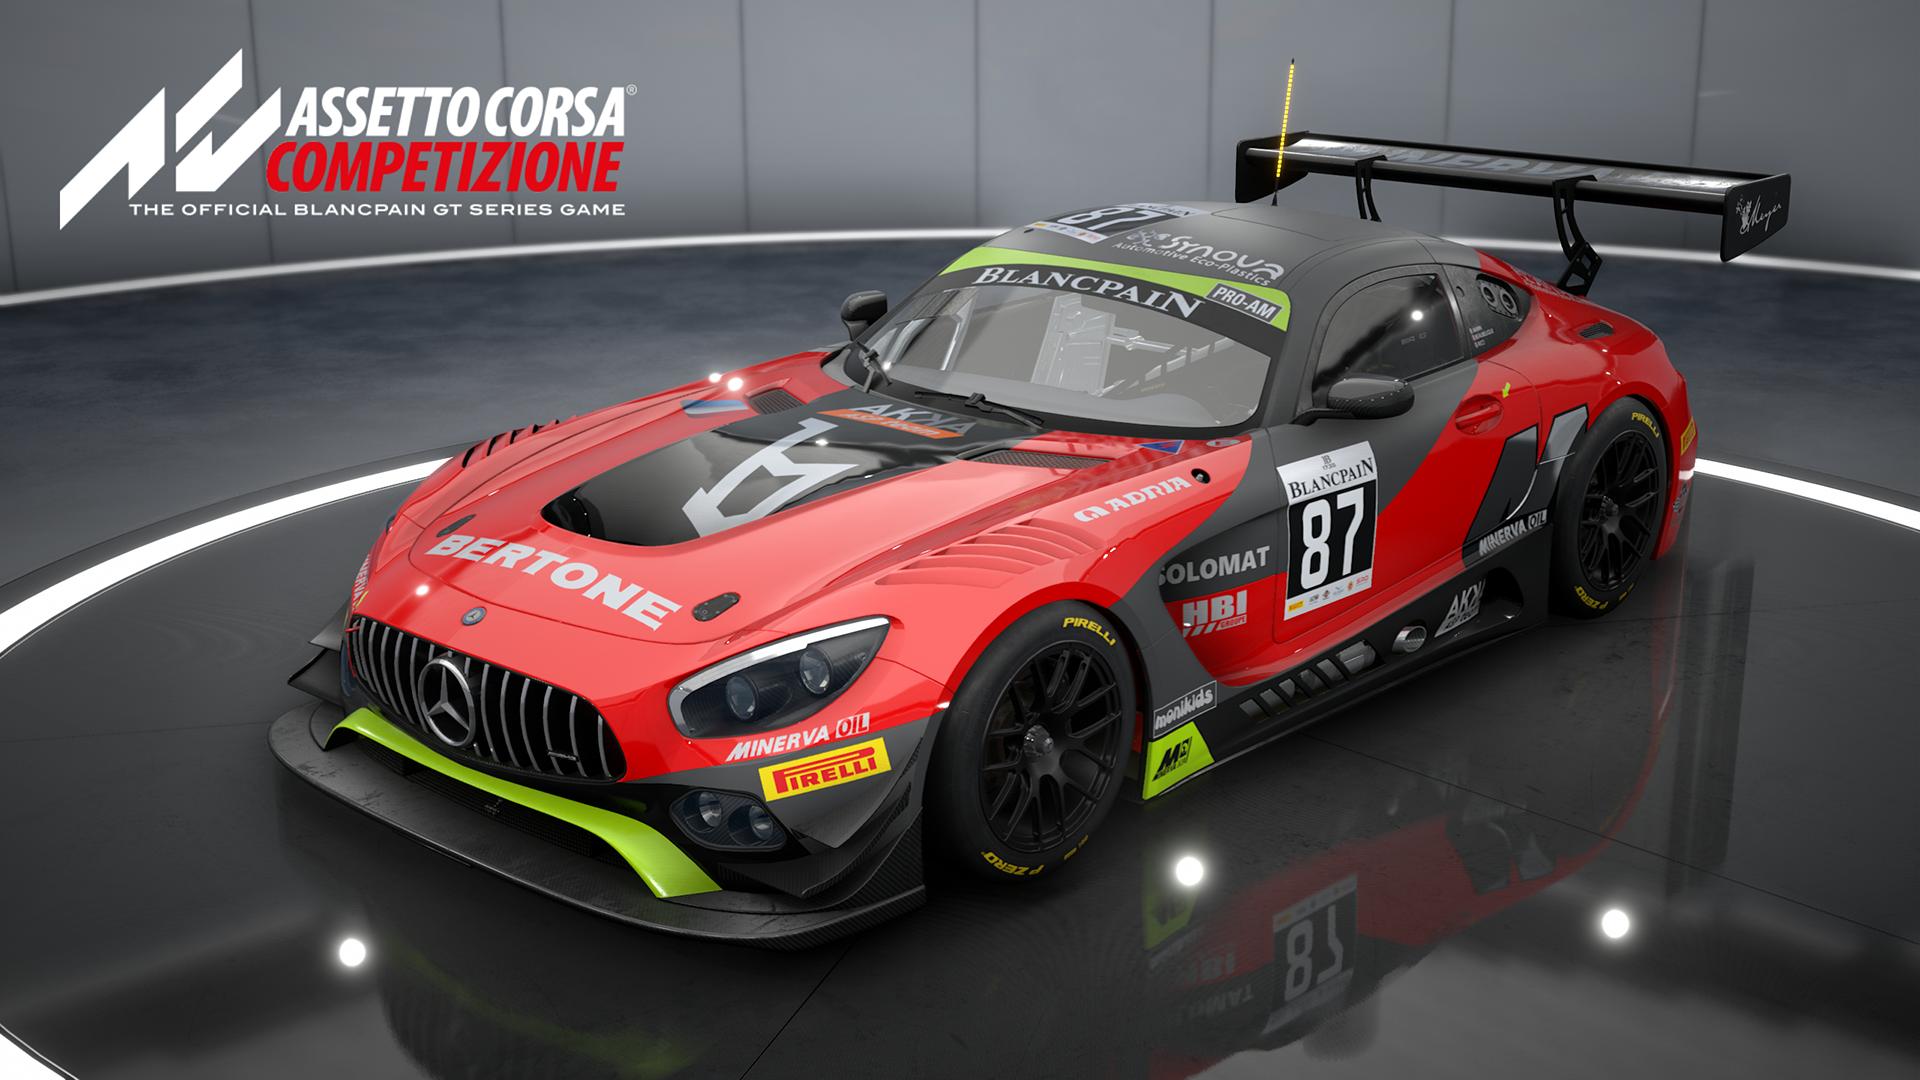 Assetto Corsa Question What Do You Make Of The Mercedes Amg Gt3 Got Any Top Tips For Other Sim Racers Captured Any Awesome Screens Out On Track Let Us Know